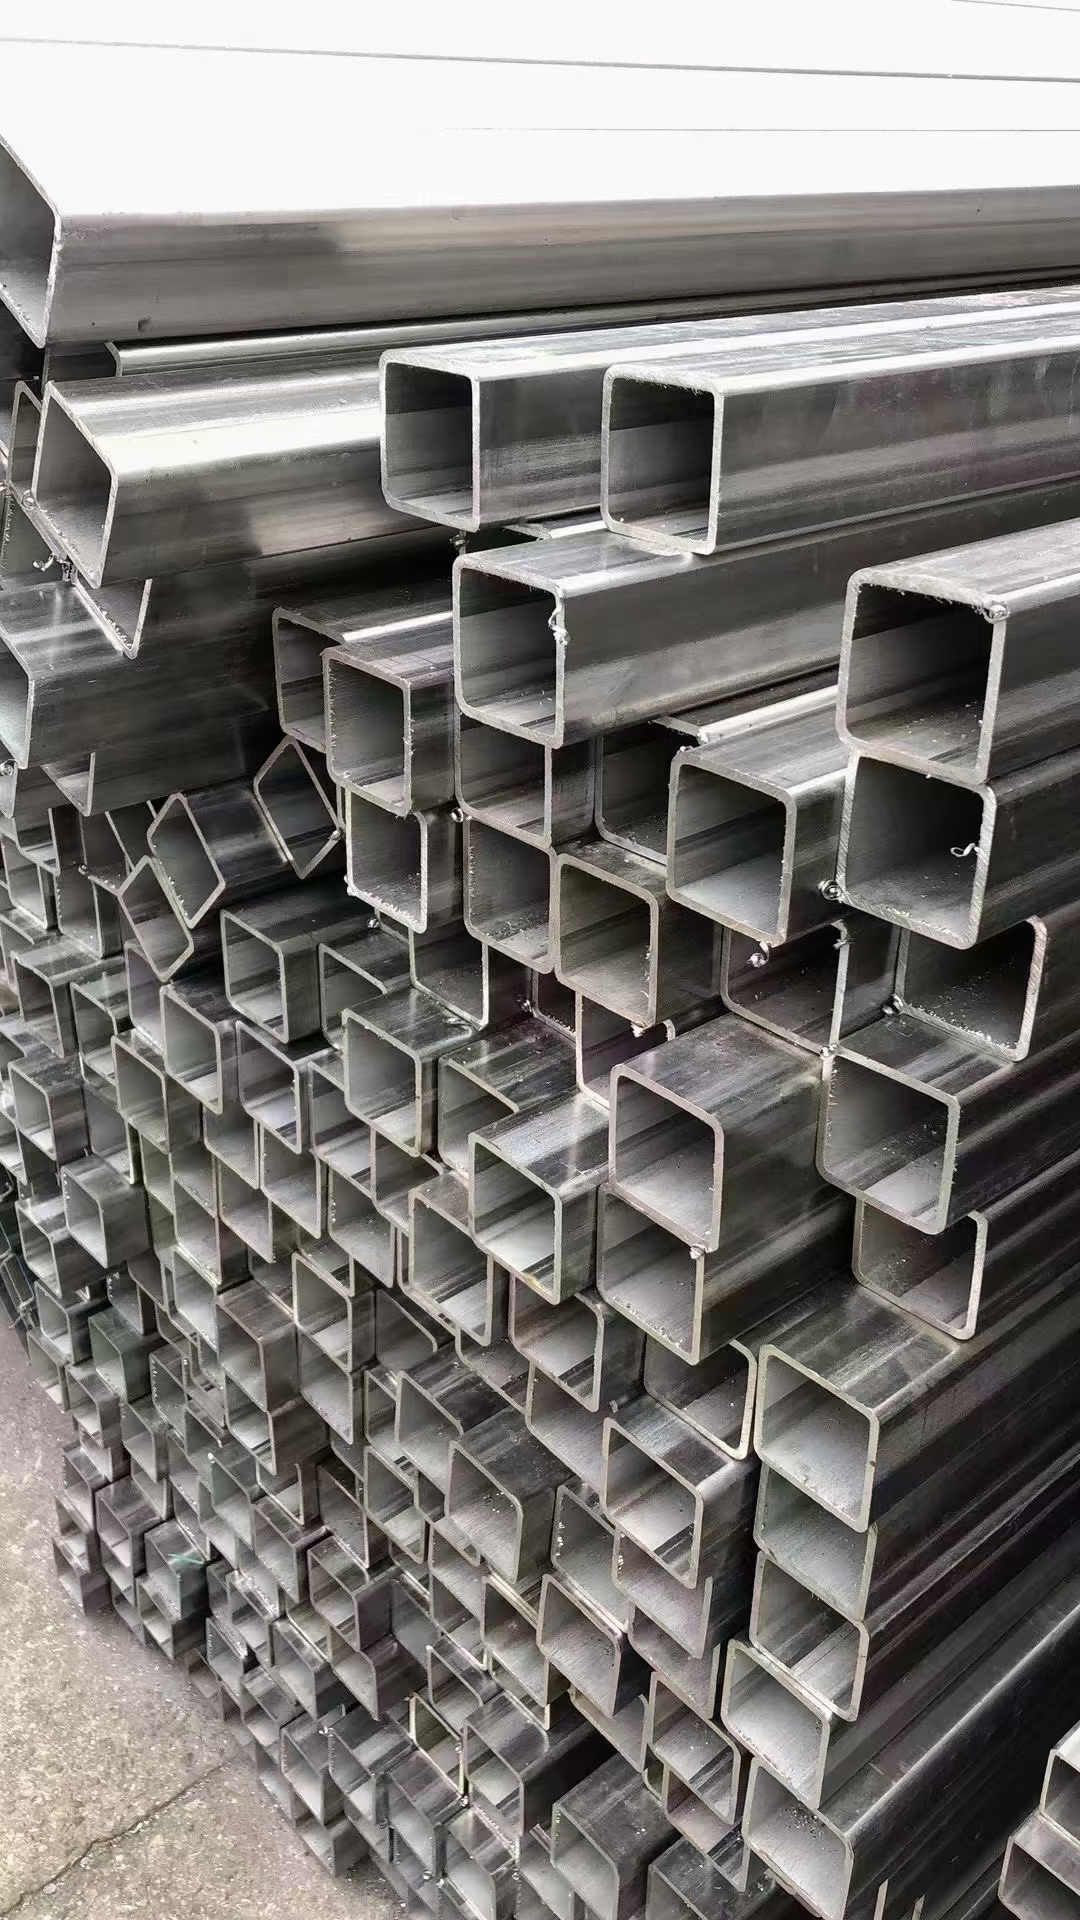 Factory Price AISI Stainless Steel Seamless Square Tube 201 202 304 316 316L Square Stainless Steel Pipe/rectangle Stainless Steel Tube